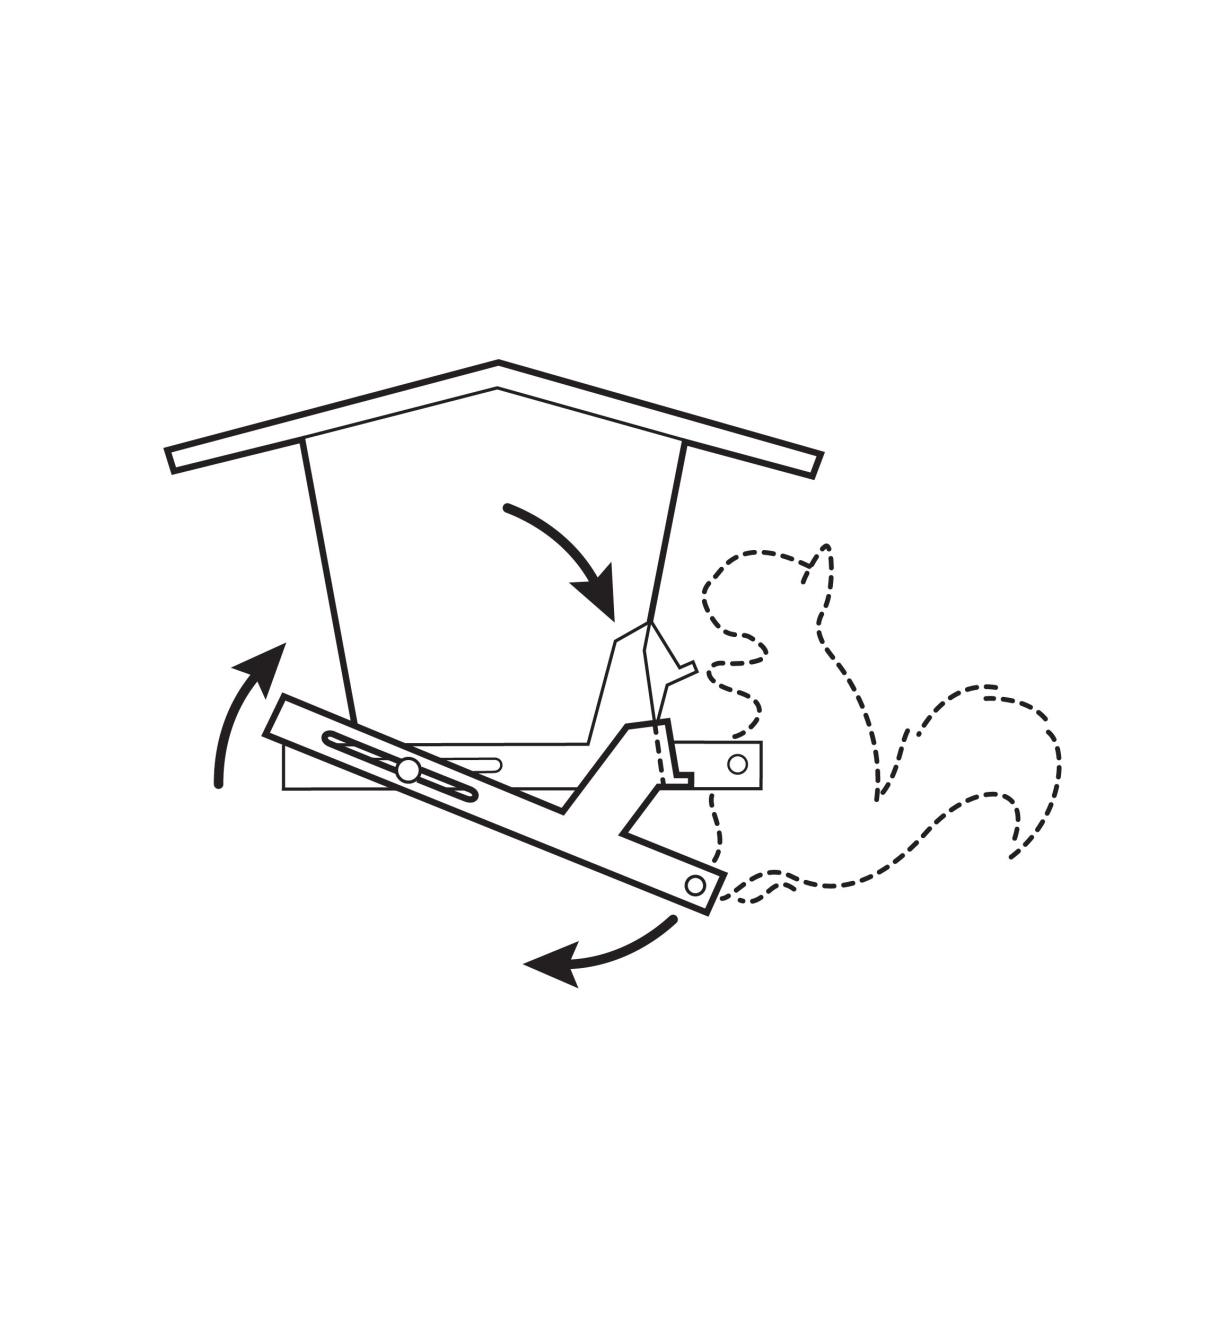 Diagram shows how the squirrel's weight closes the door over the seeds